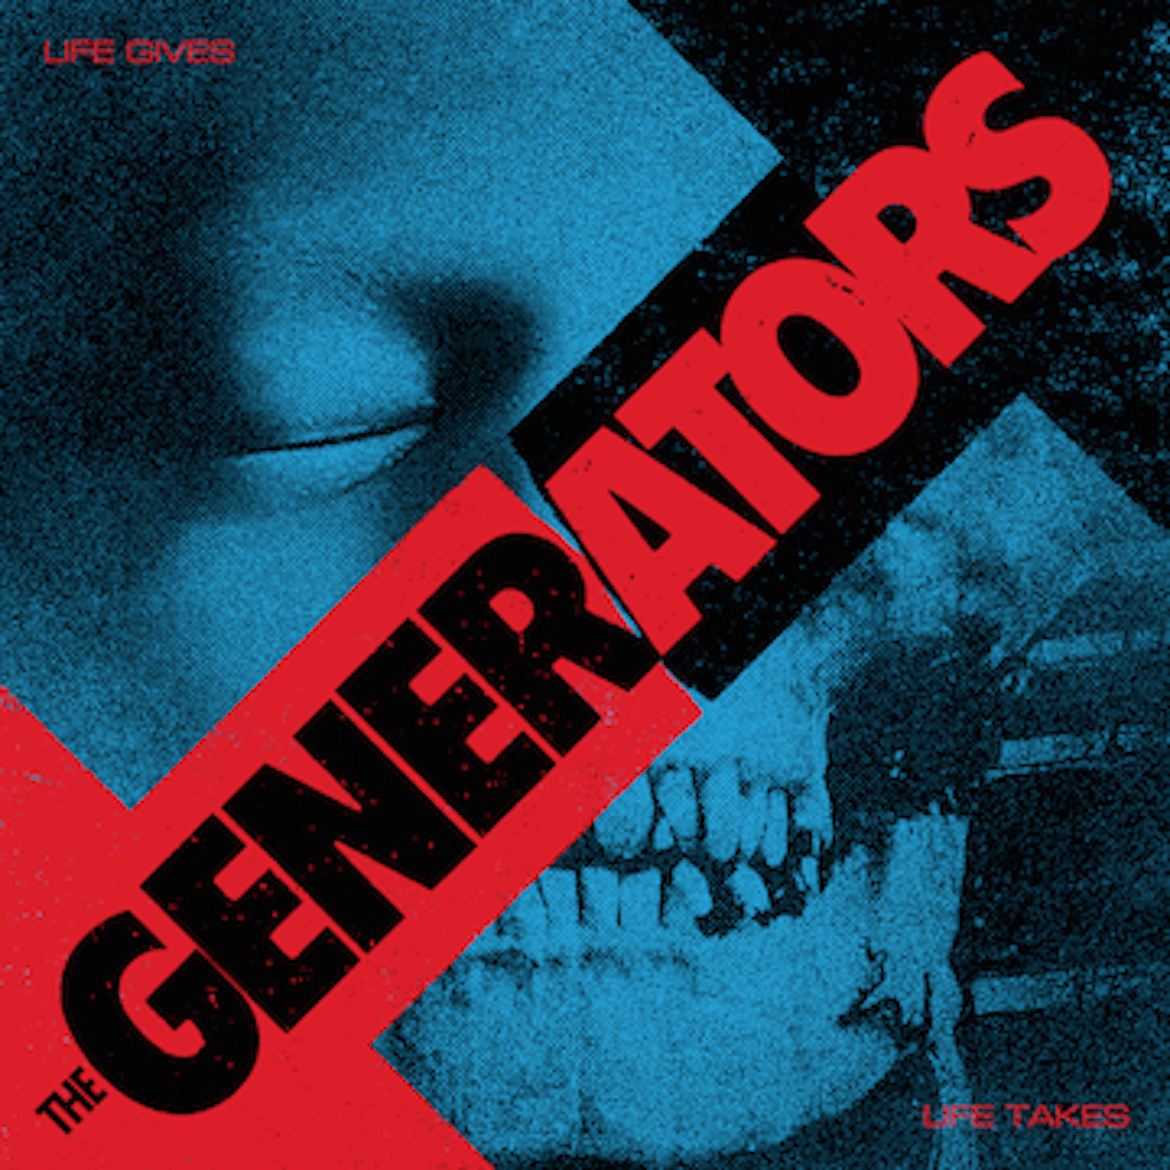 Life Gives and Life Takes album cover by The Generators